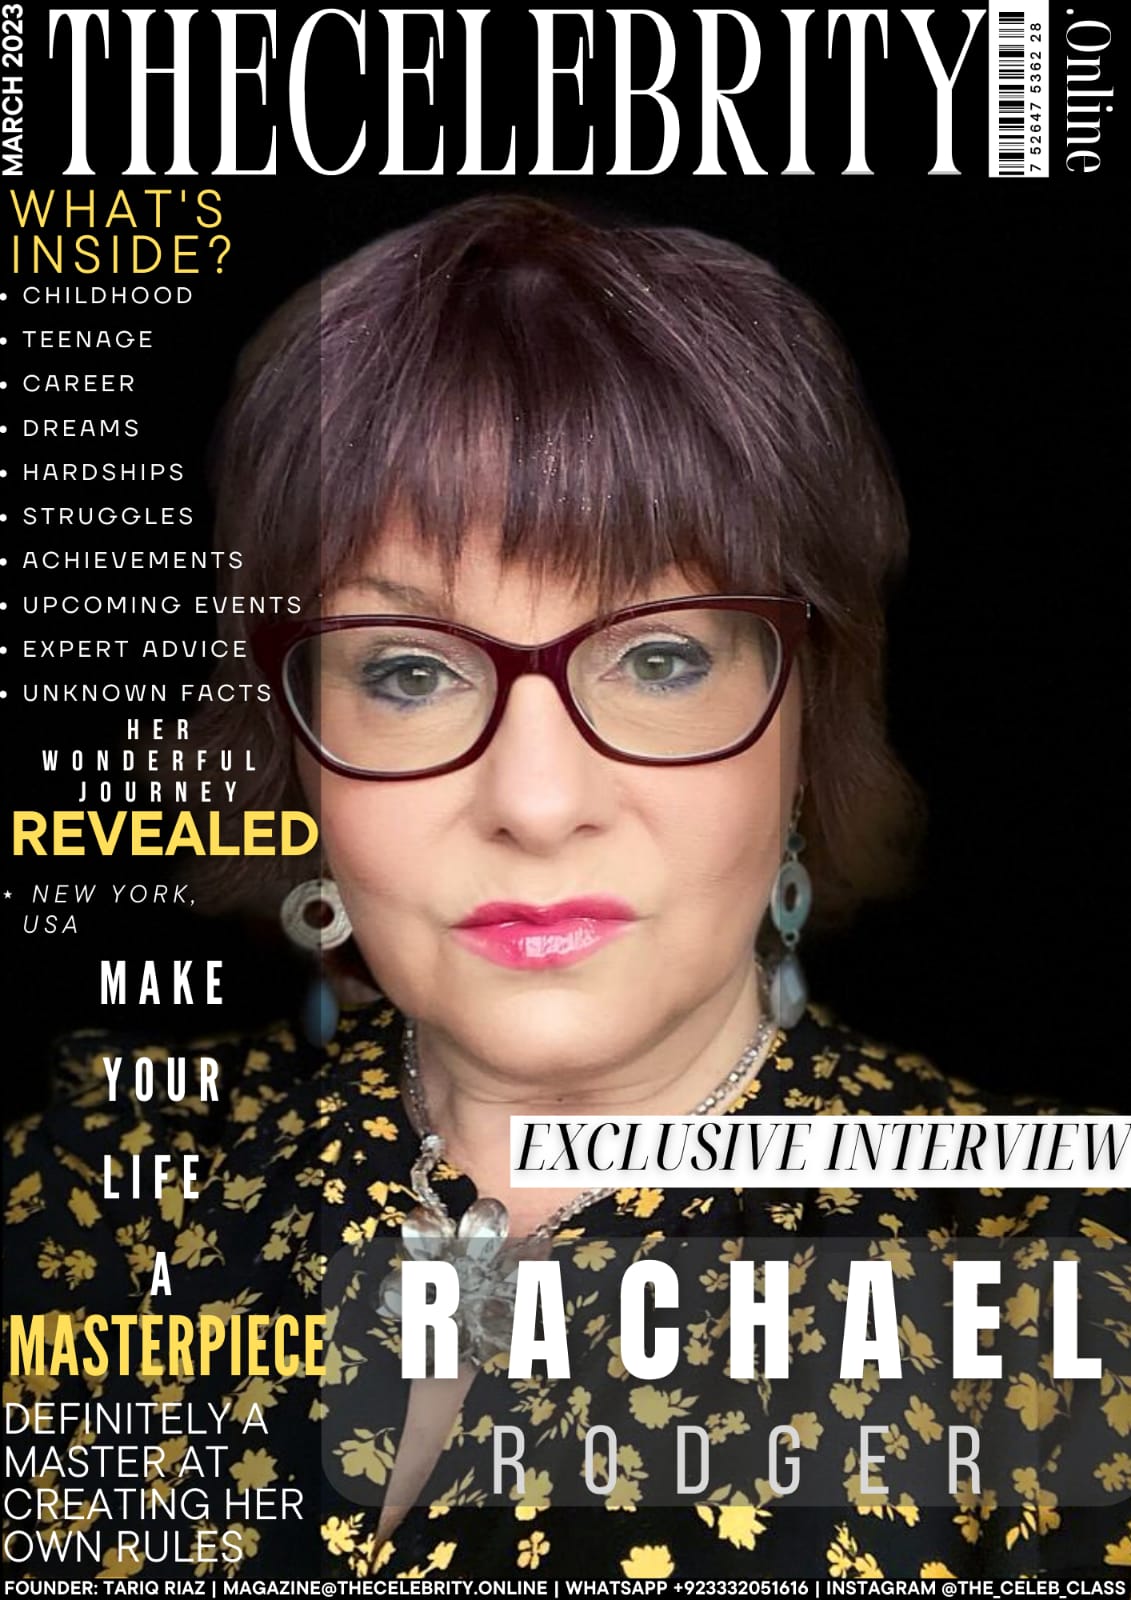 Rachael Rodger Exclusive Interview – ‘It’s good to adapt, grow and never stop learning’